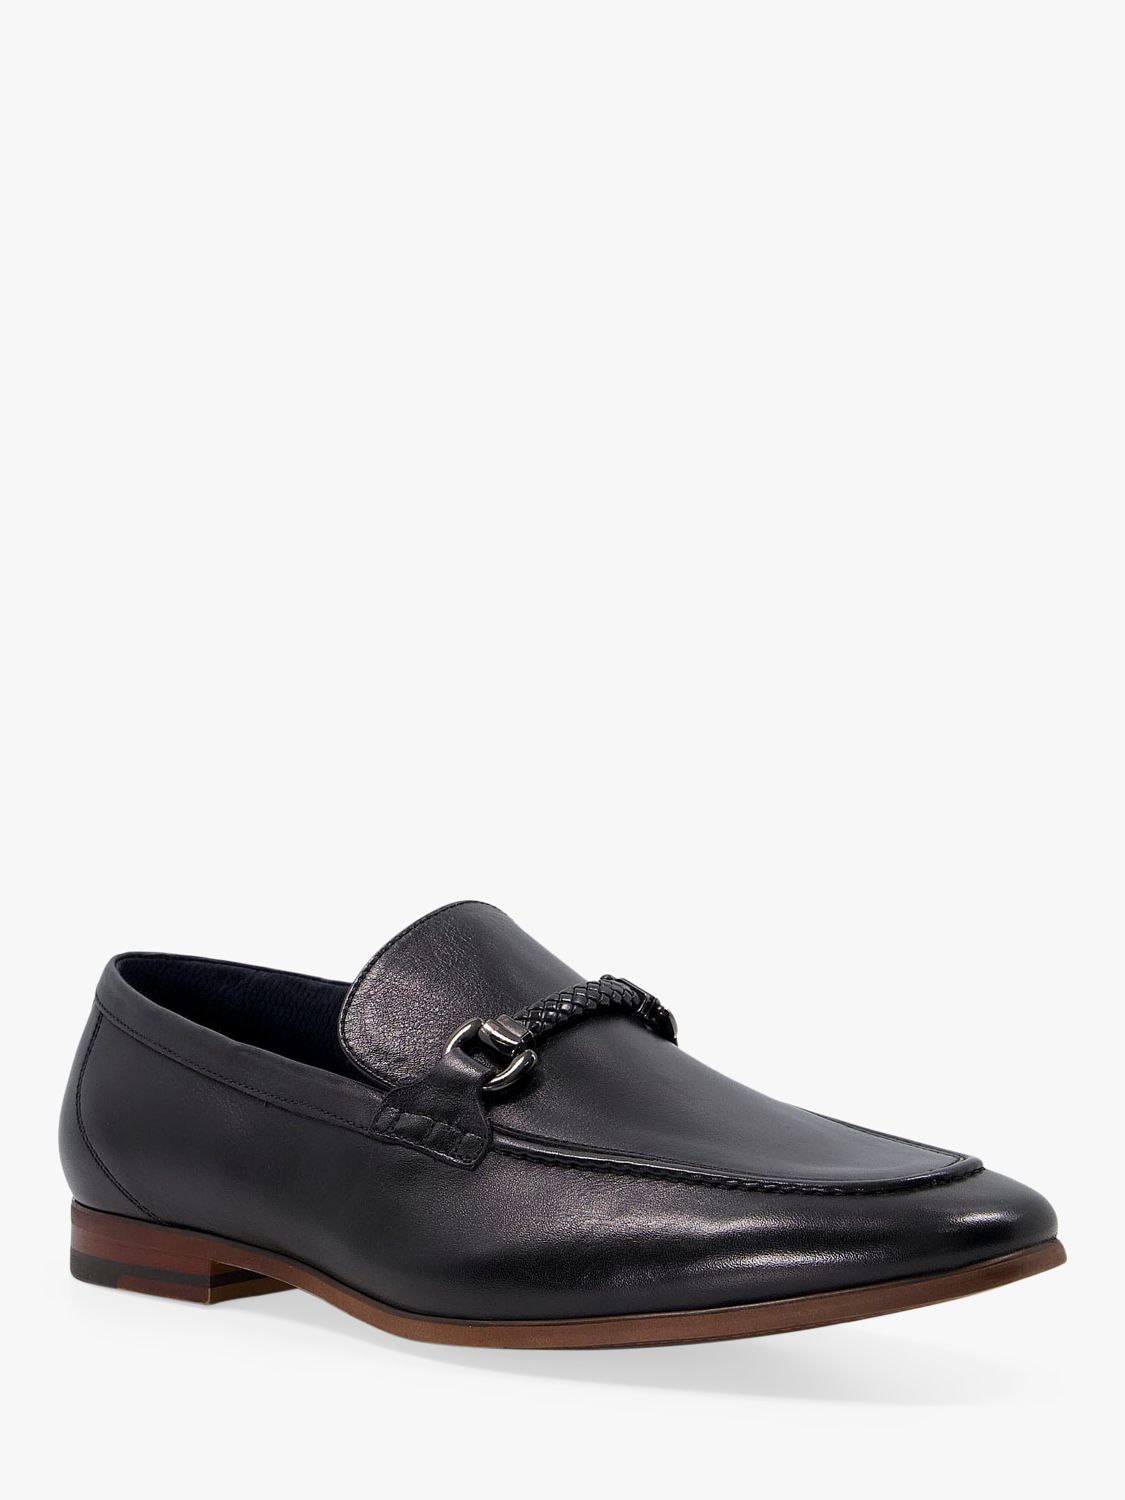 Dune Santino Wide Fit Woven Trim Leather Loafers, Black at John Lewis ...